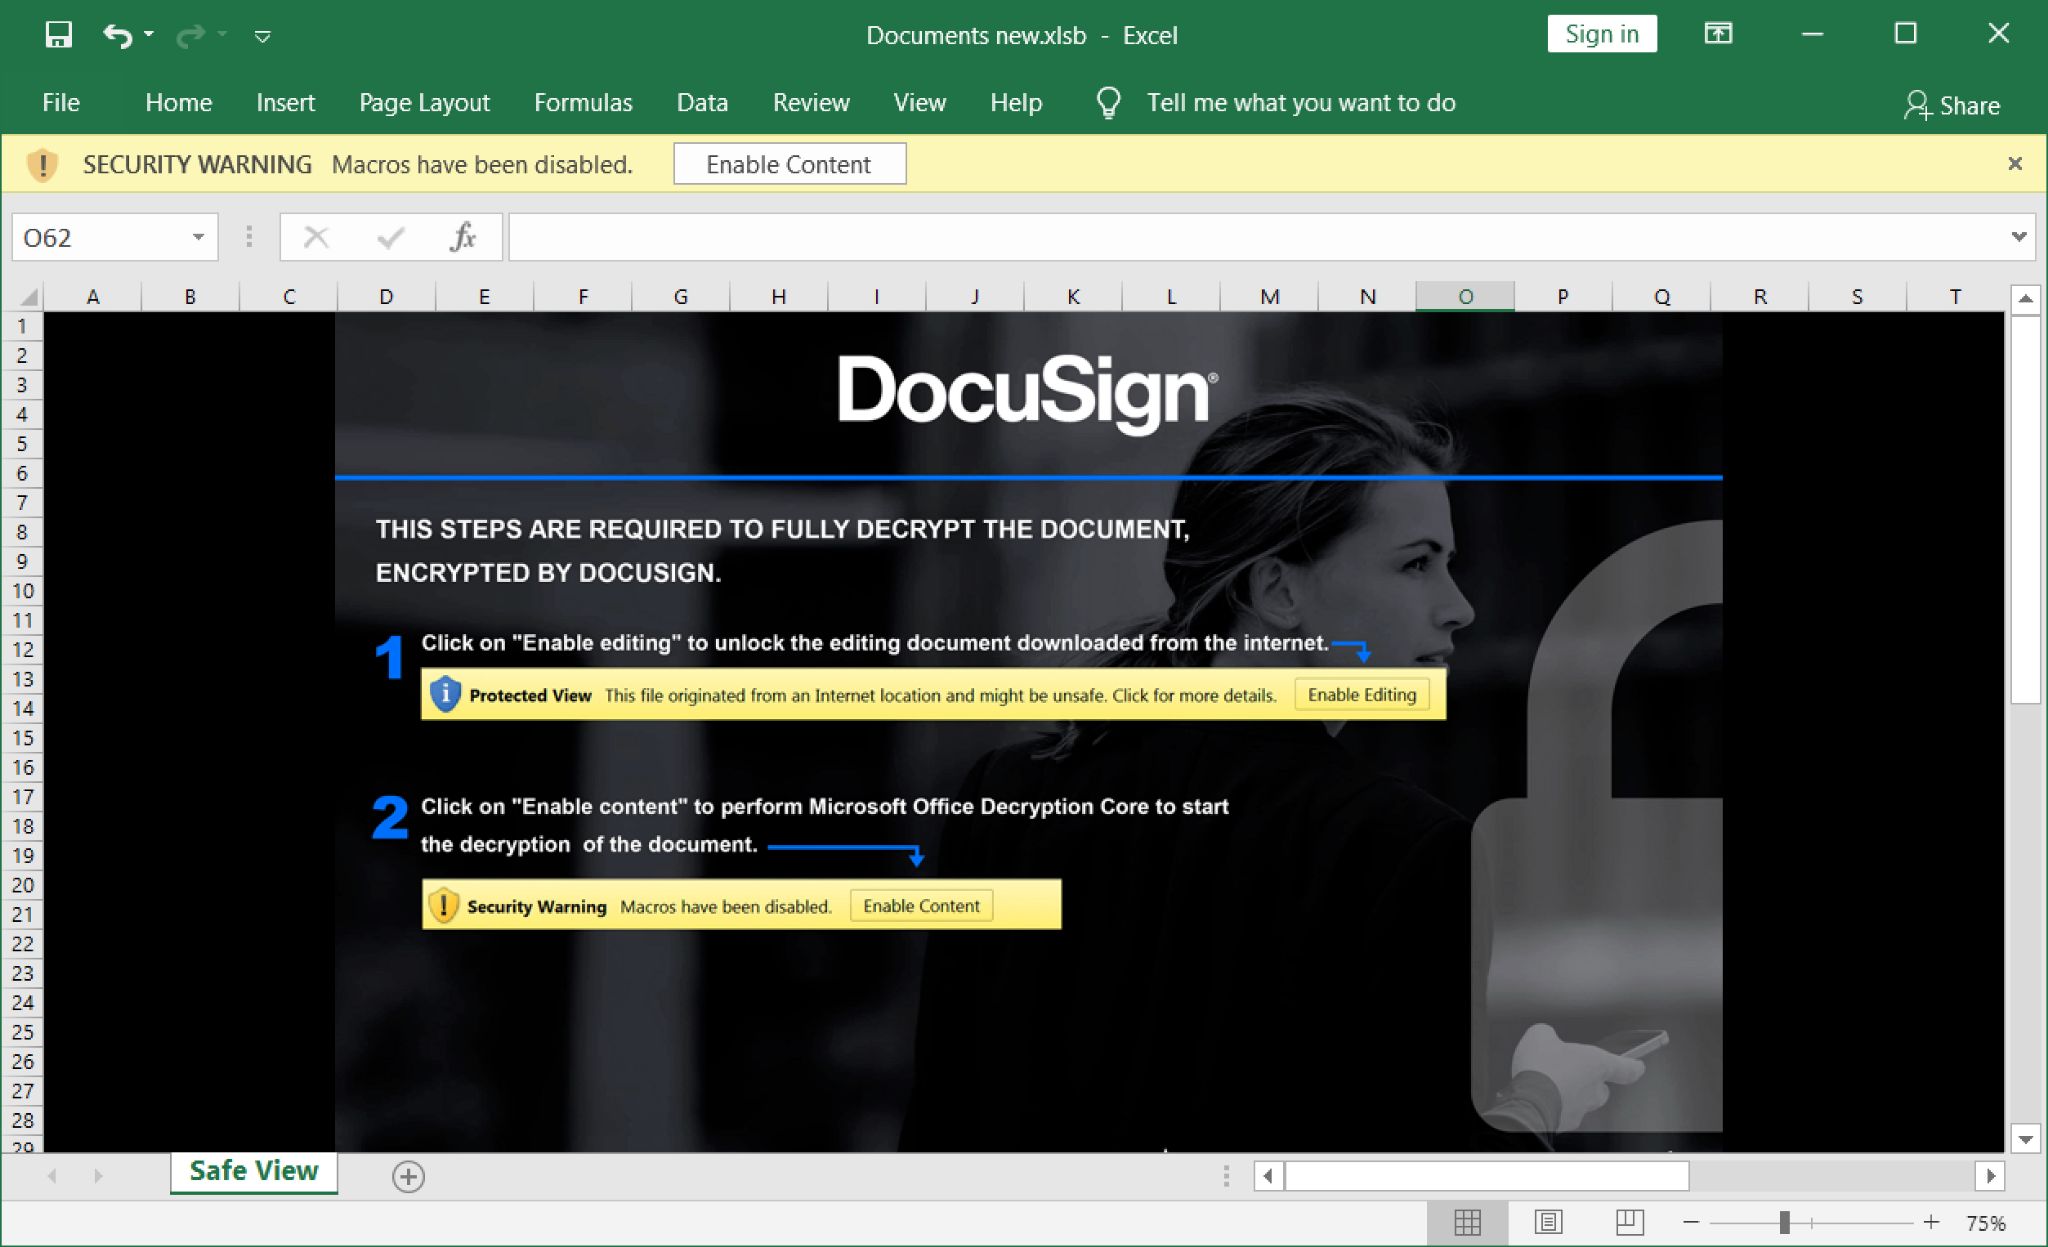 A malicious Excel template that attempts to instill confidence by taking advantage of the DocuSign brand name and image. 